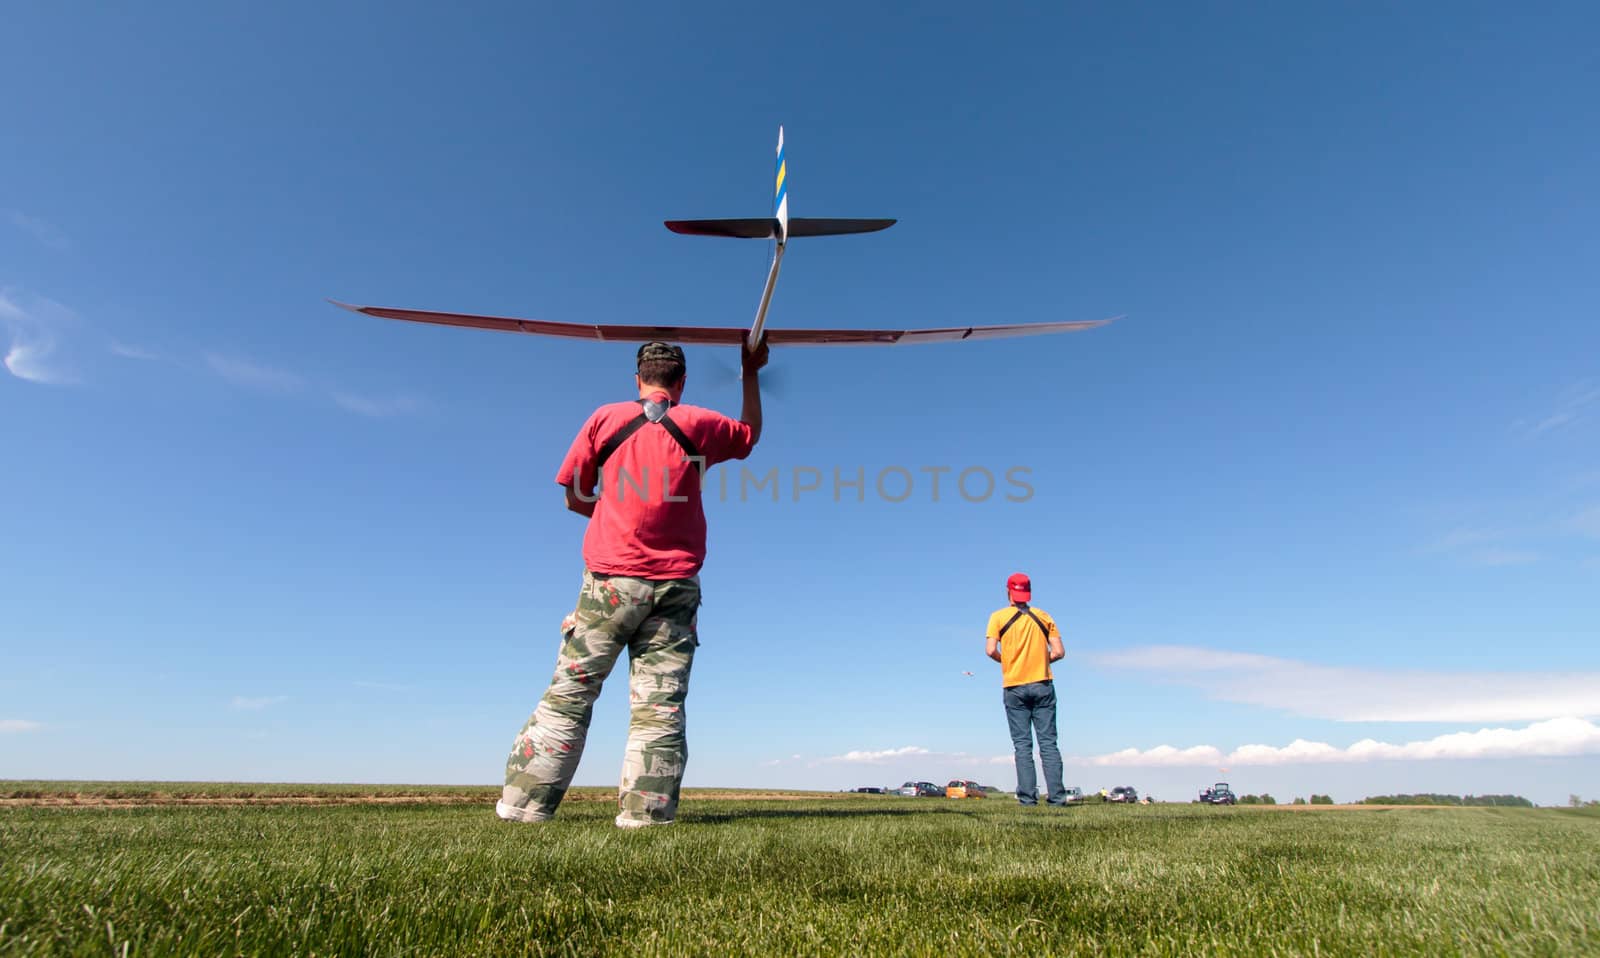 Man launches into the sky RC glider by Discovod